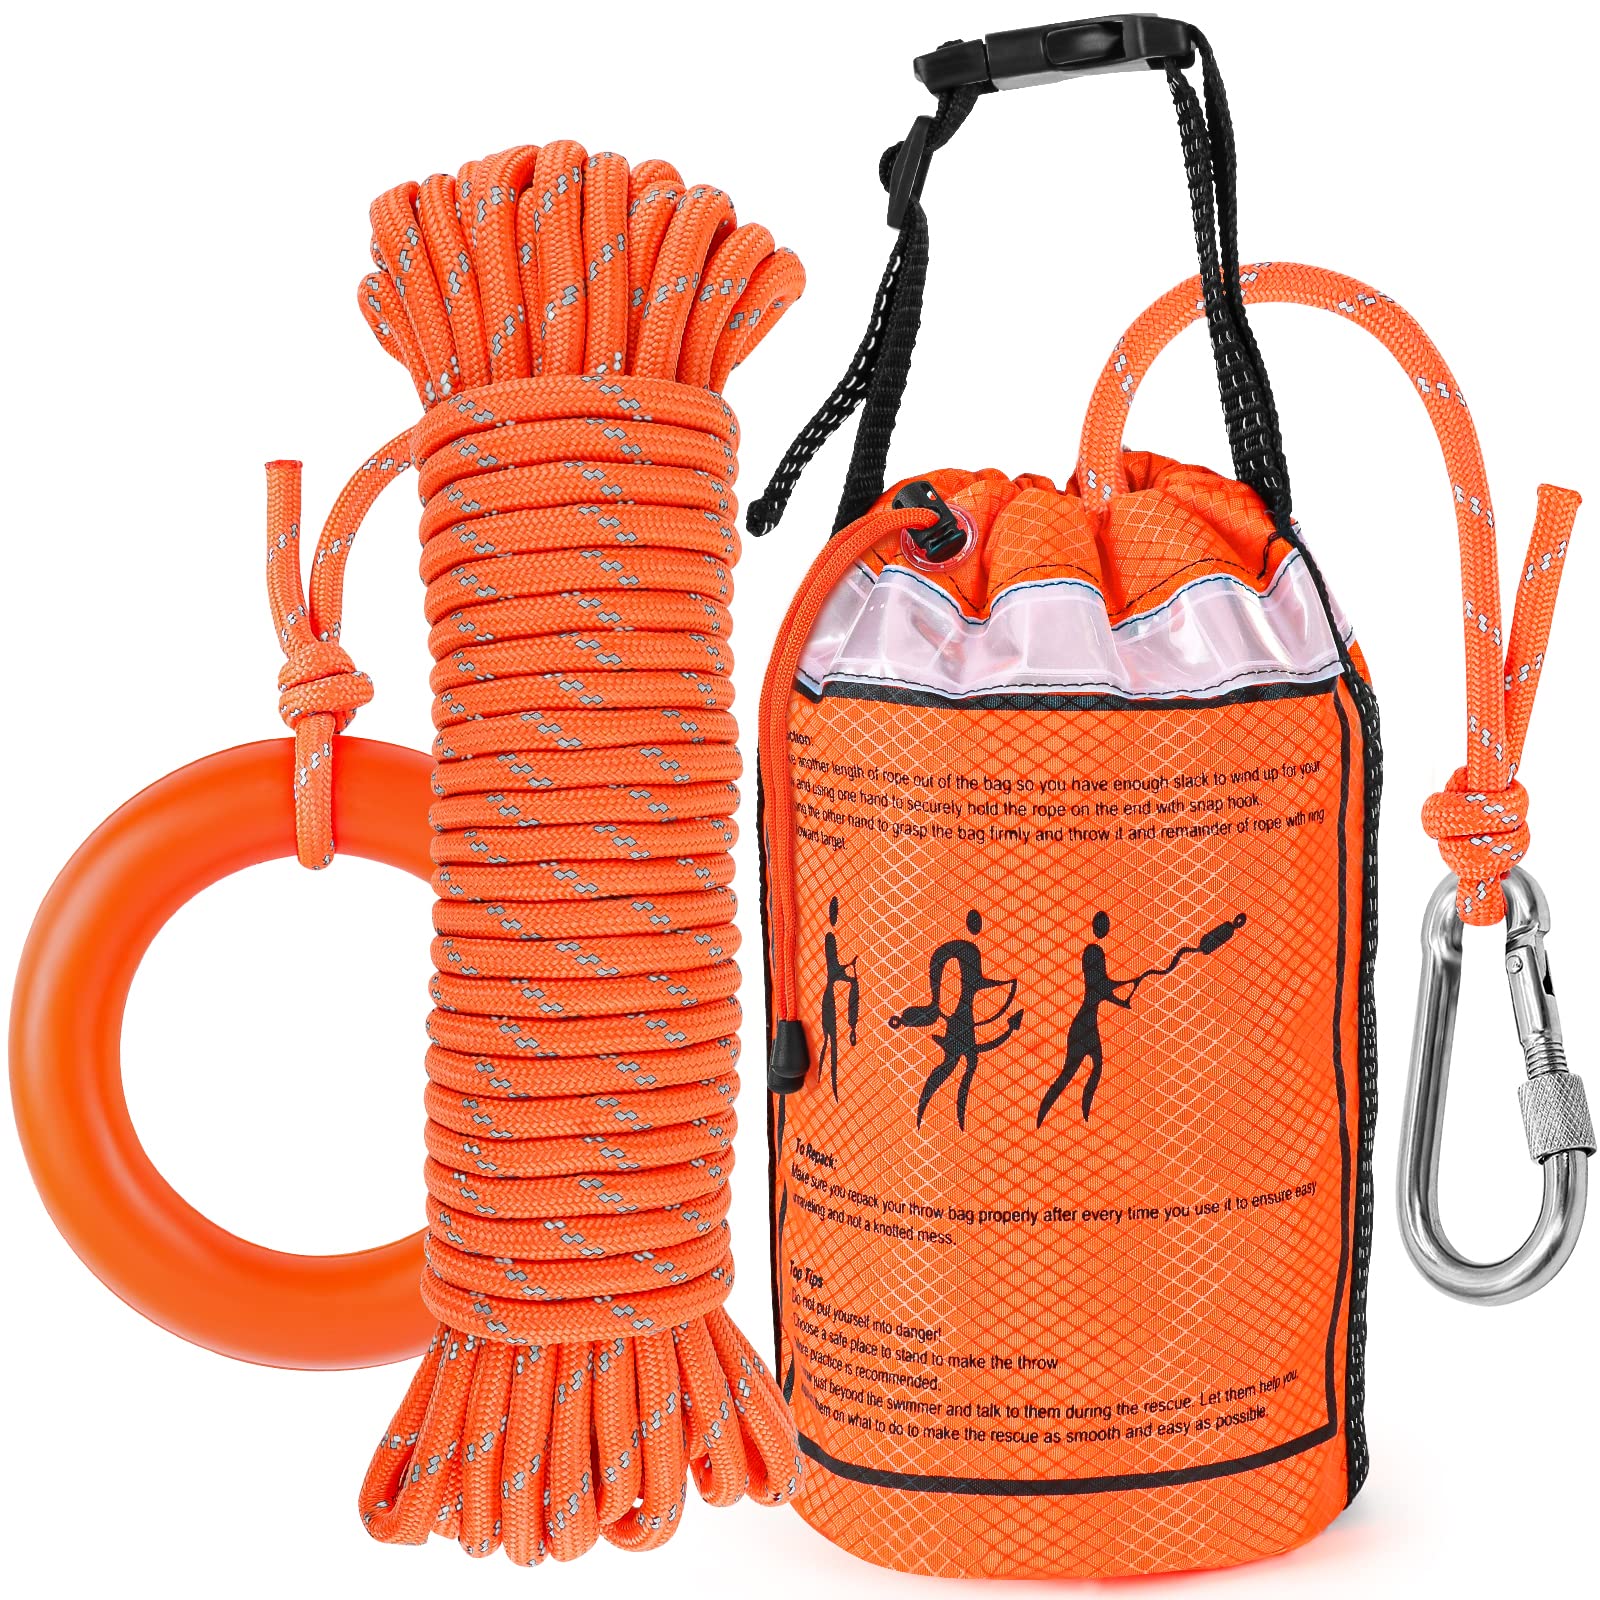 NTR Water Rescue Throw Bag with 50/70/98 Feet of Rope in 3/10 Inch